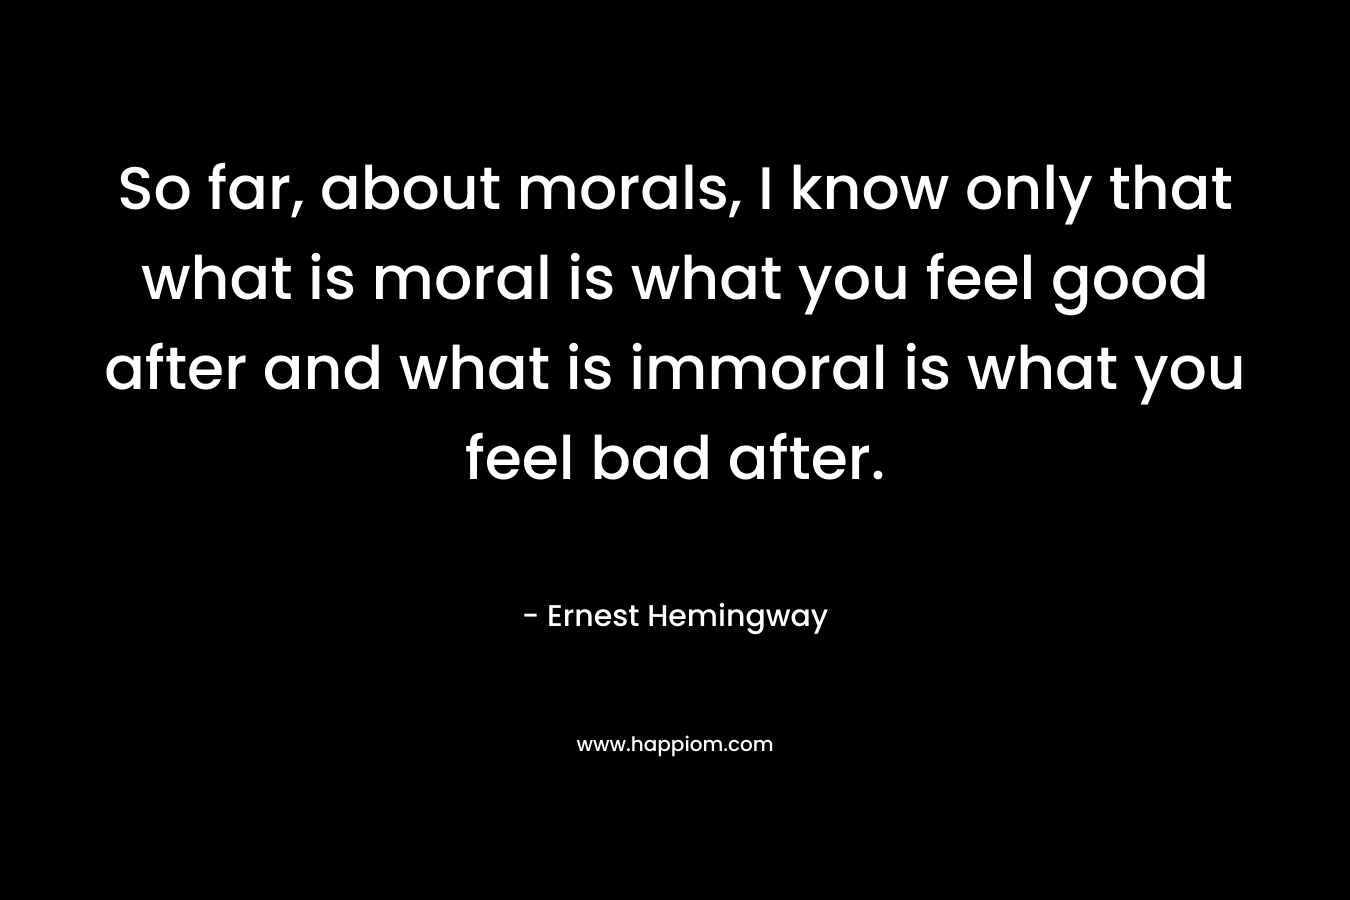 So far, about morals, I know only that what is moral is what you feel good after and what is immoral is what you feel bad after.